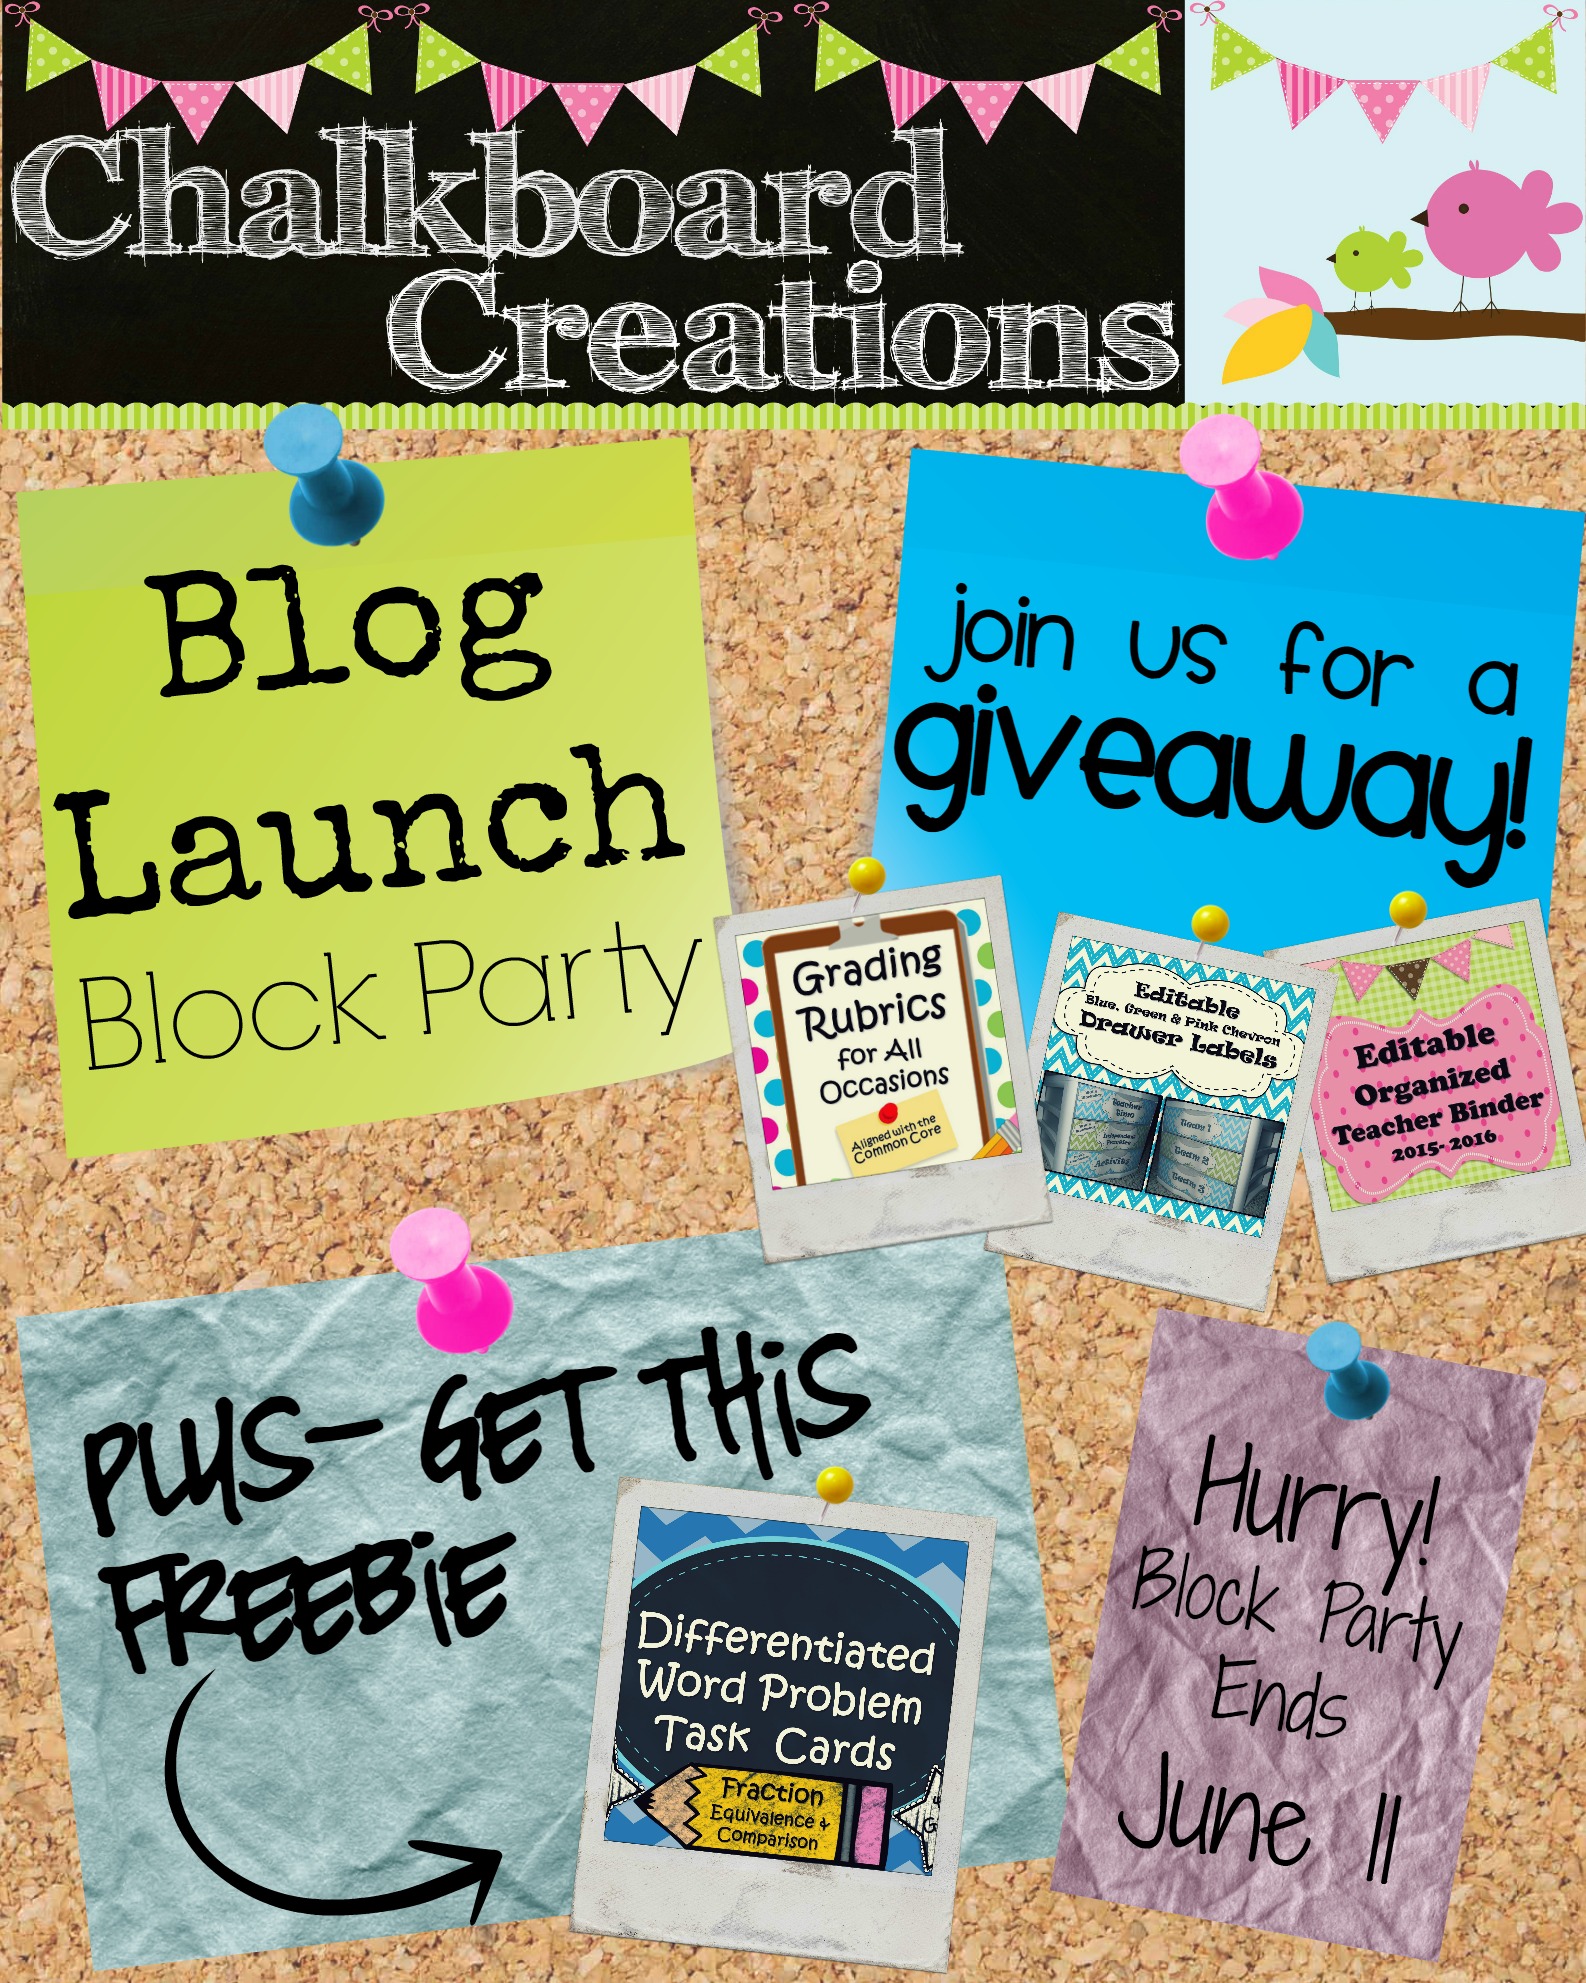 chalkboard Creations blog launch block party